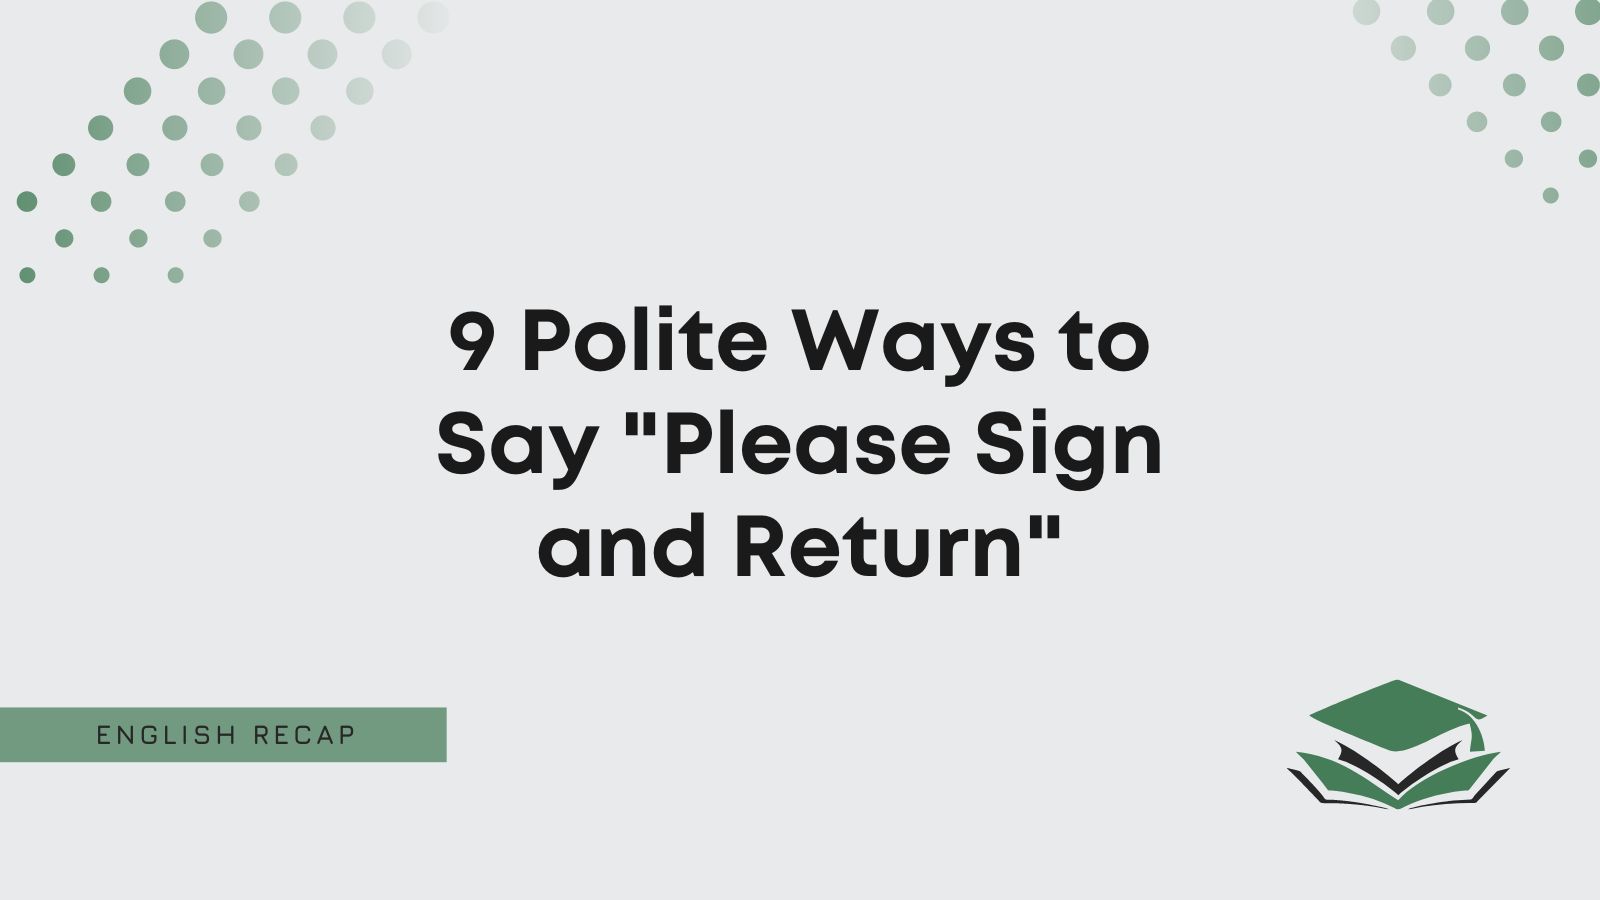 9-polite-ways-to-say-please-sign-and-return-english-recap